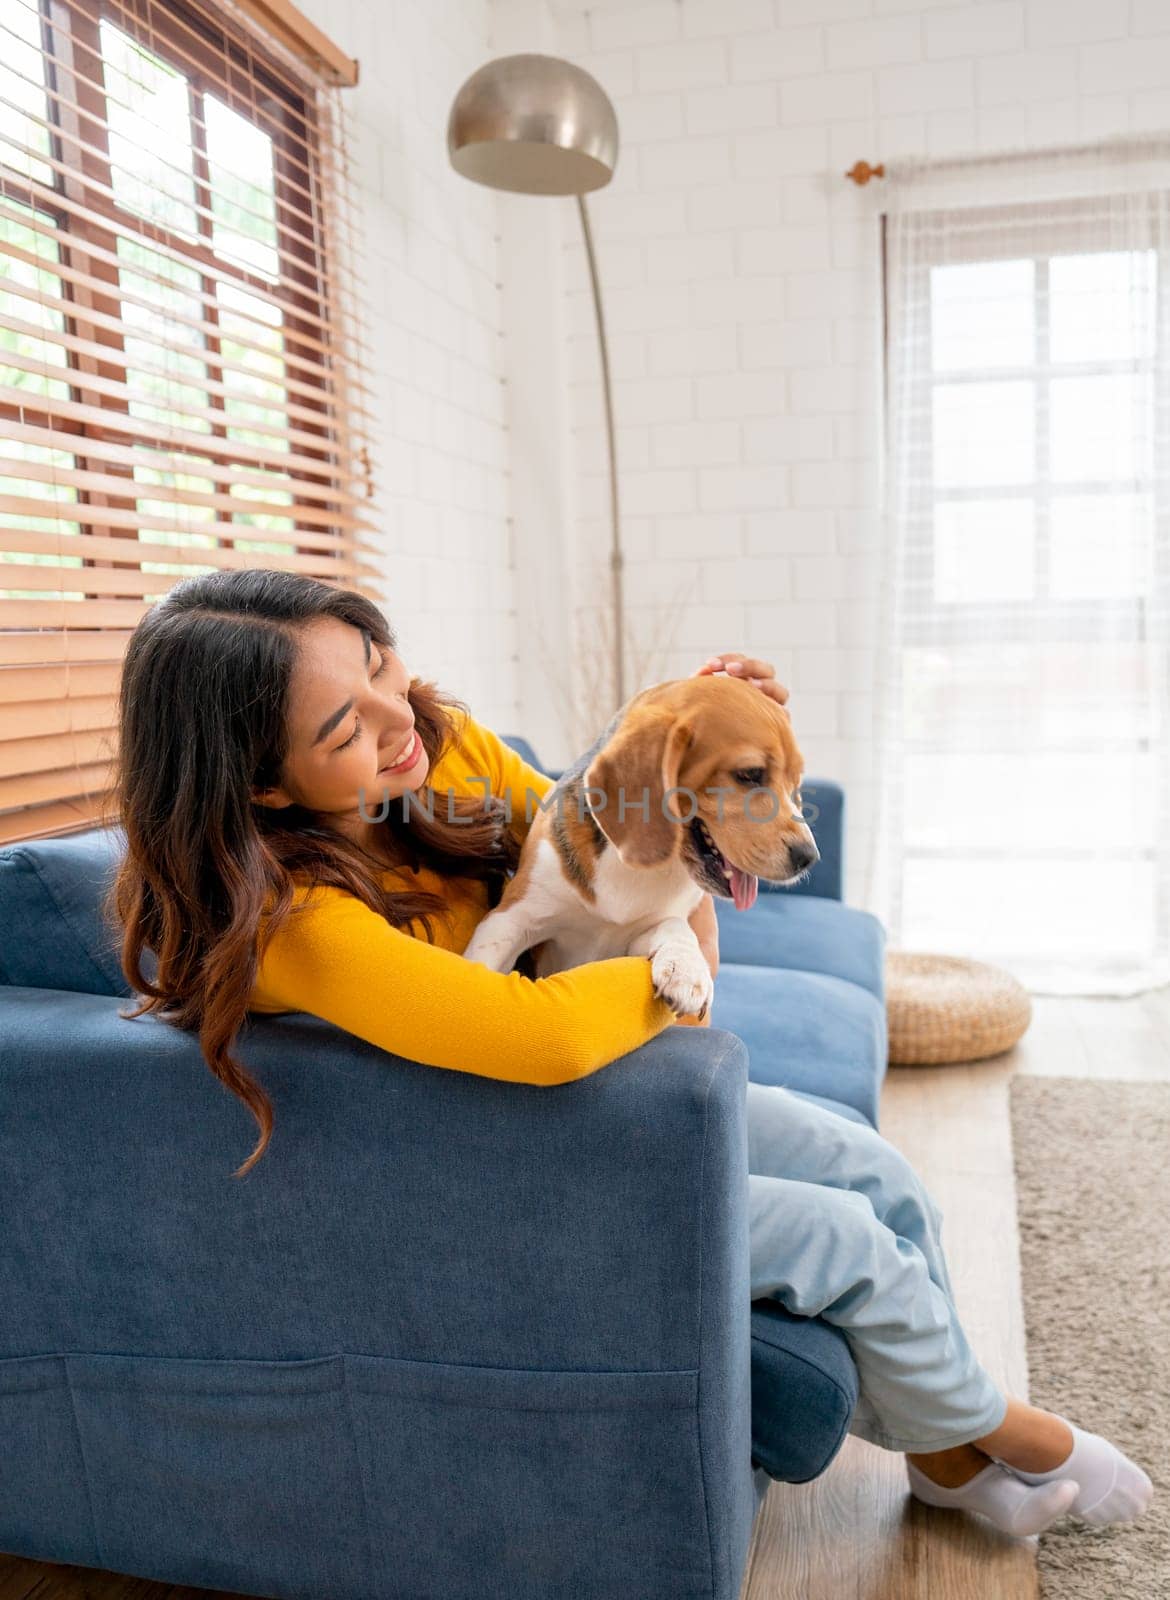 Vertical image of young Asian girl hug beagle dog and stay on sofa of living room of her house with day light. by nrradmin